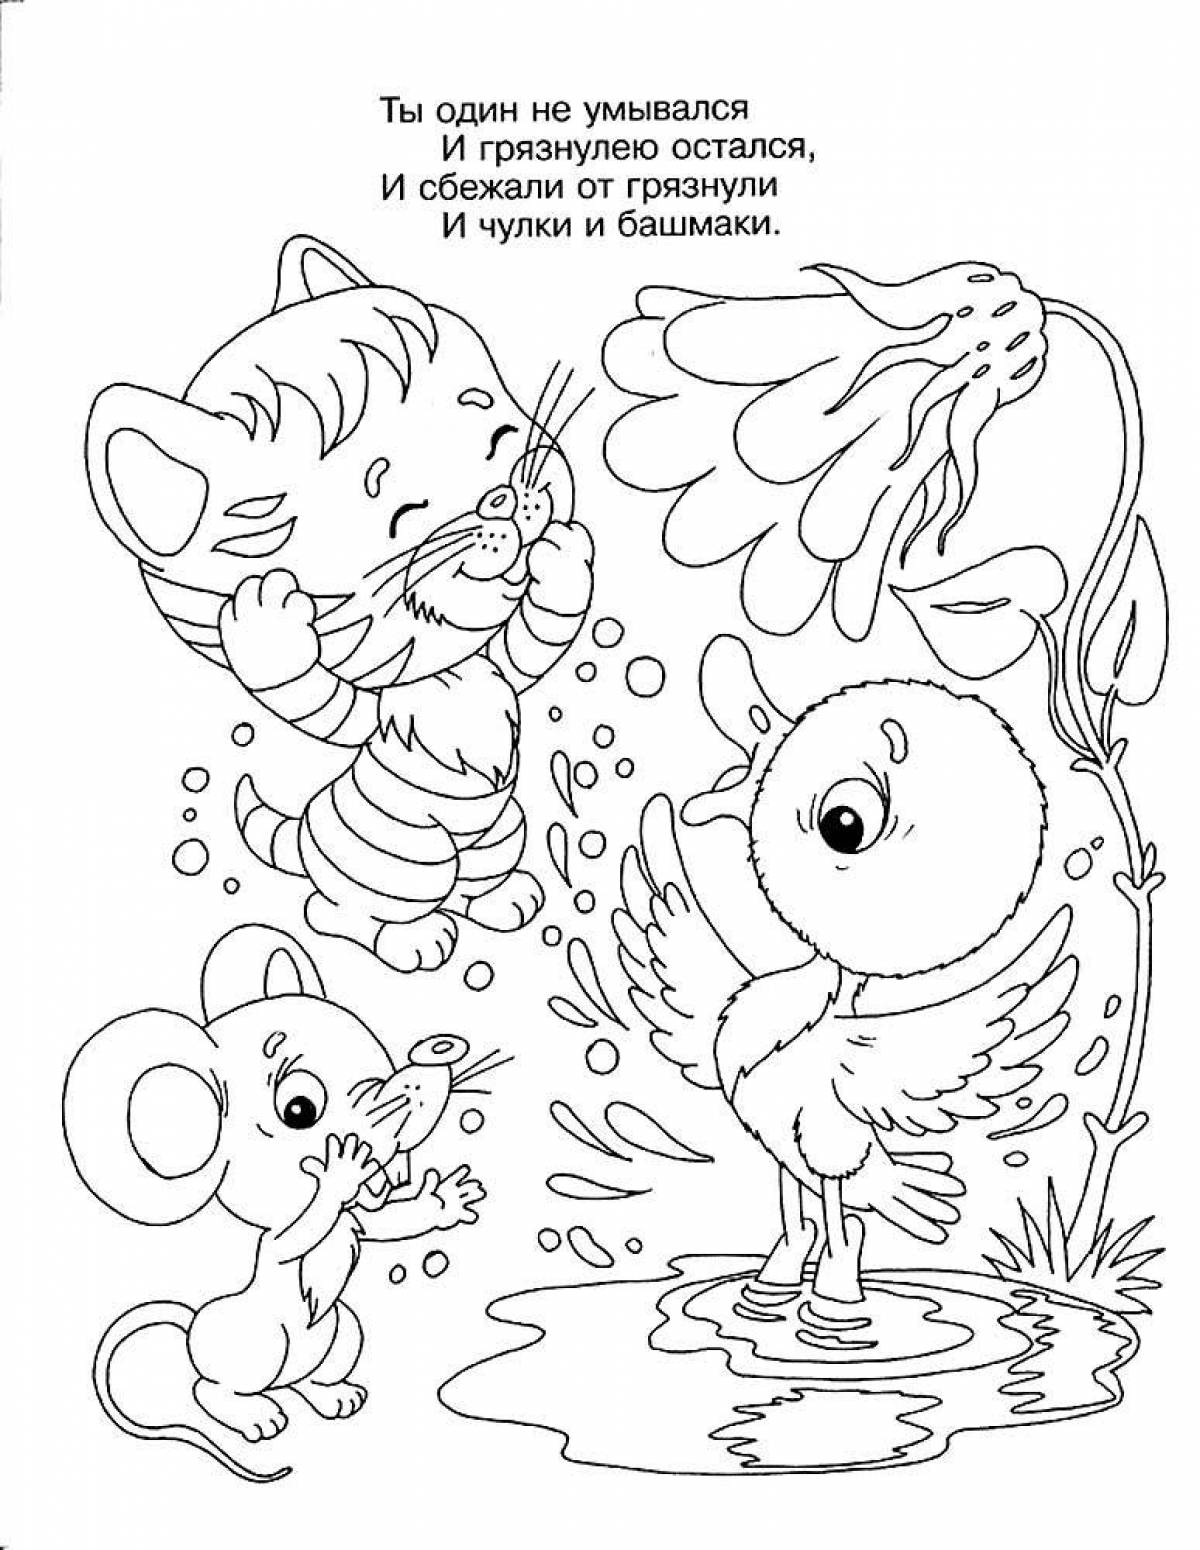 Sparkling Moidodyr coloring book for kids